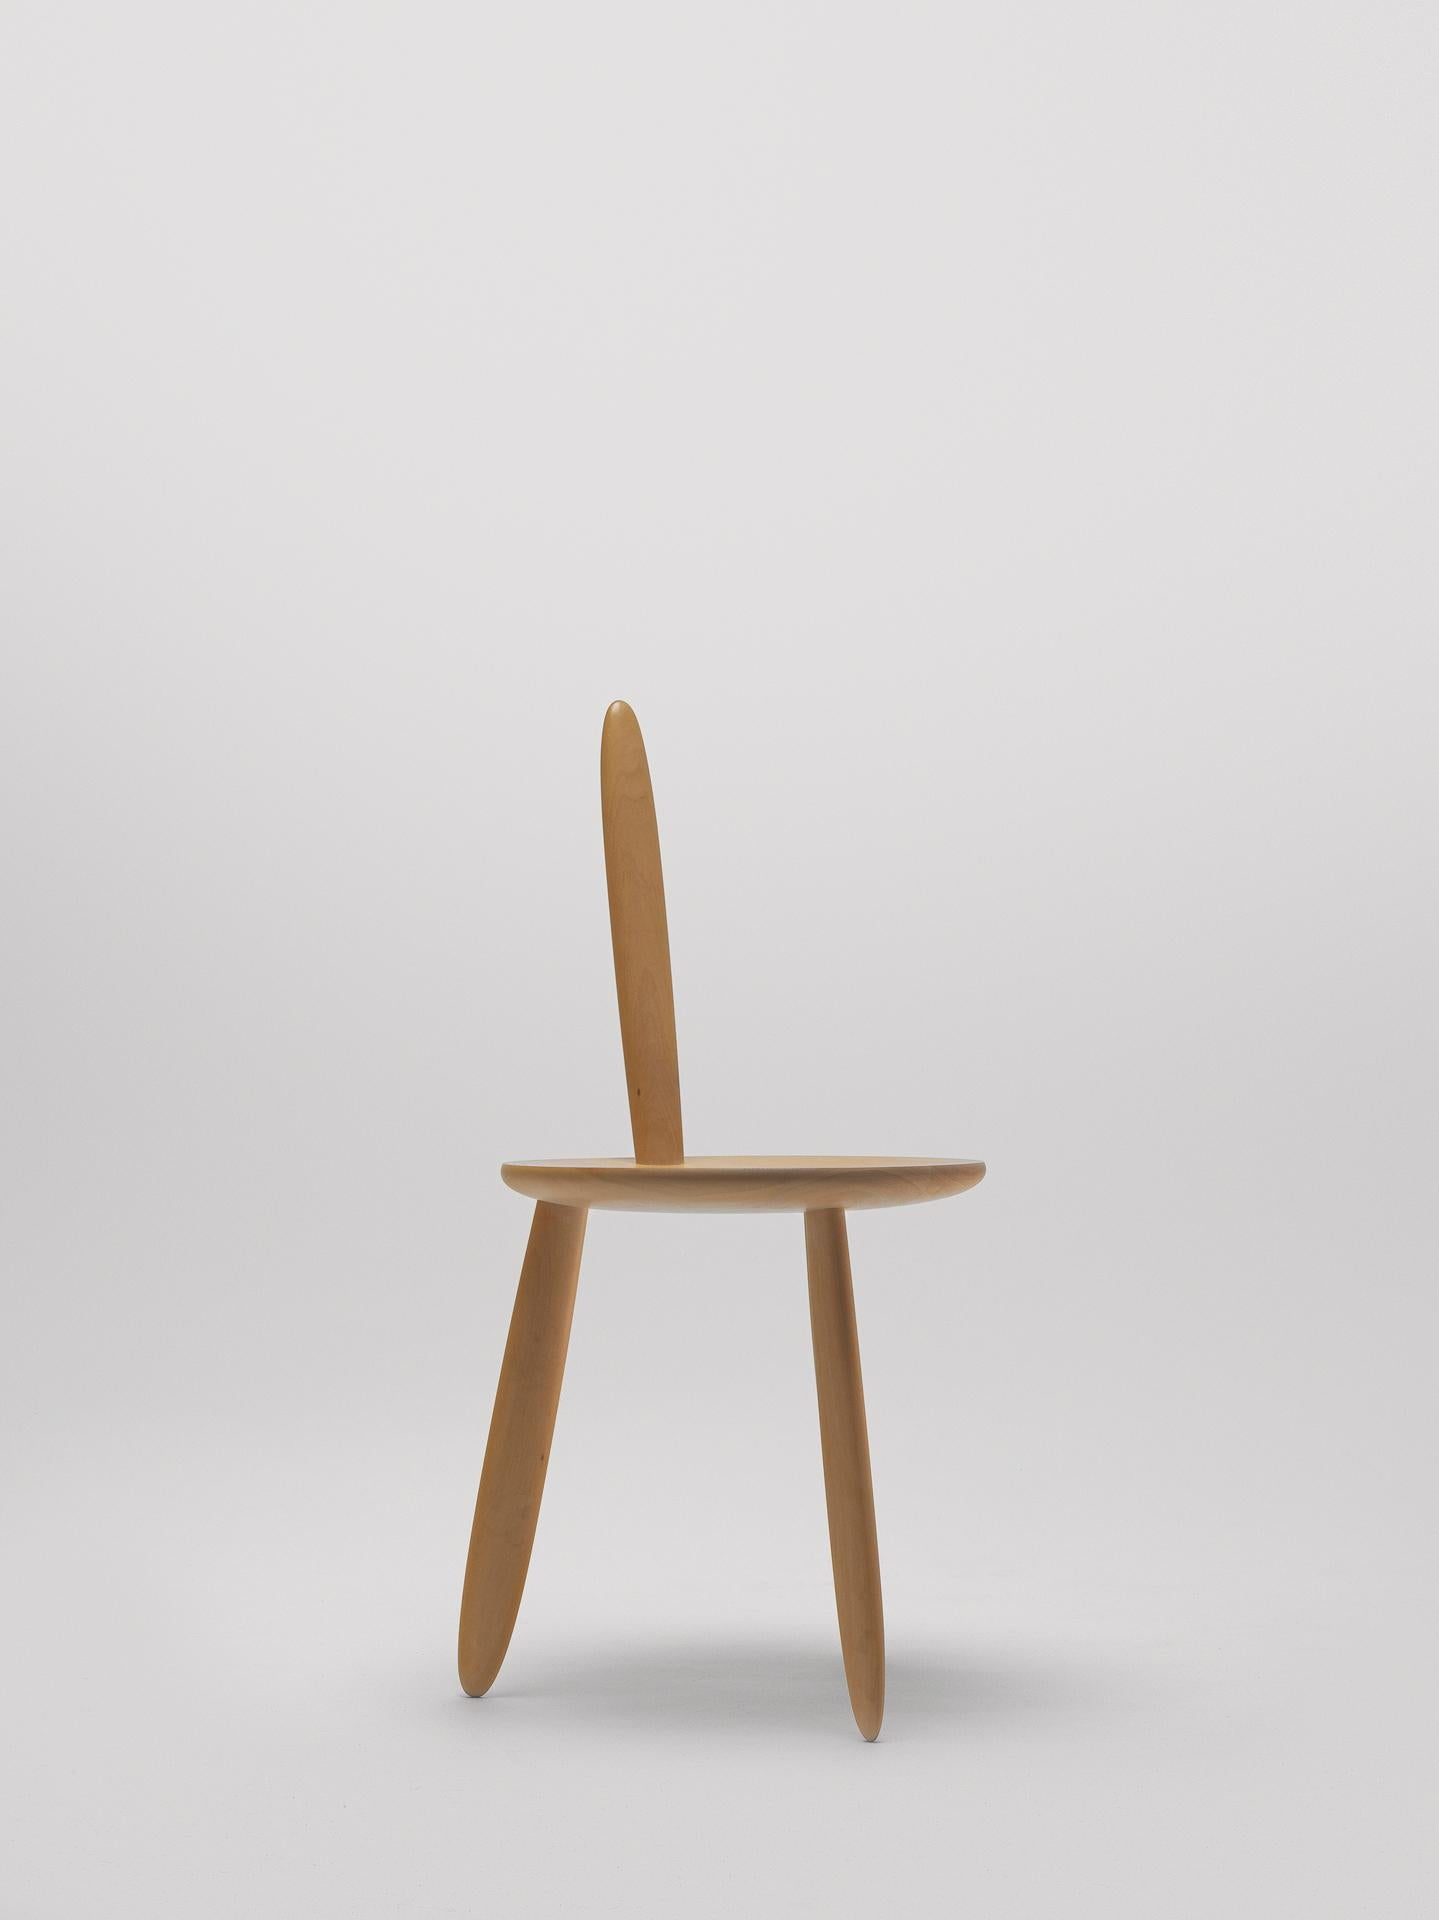 Contemporary 3DWN1UP Chair by Aldo Bakker - Limited Edition of 12 - c. 2010-2014 For Sale